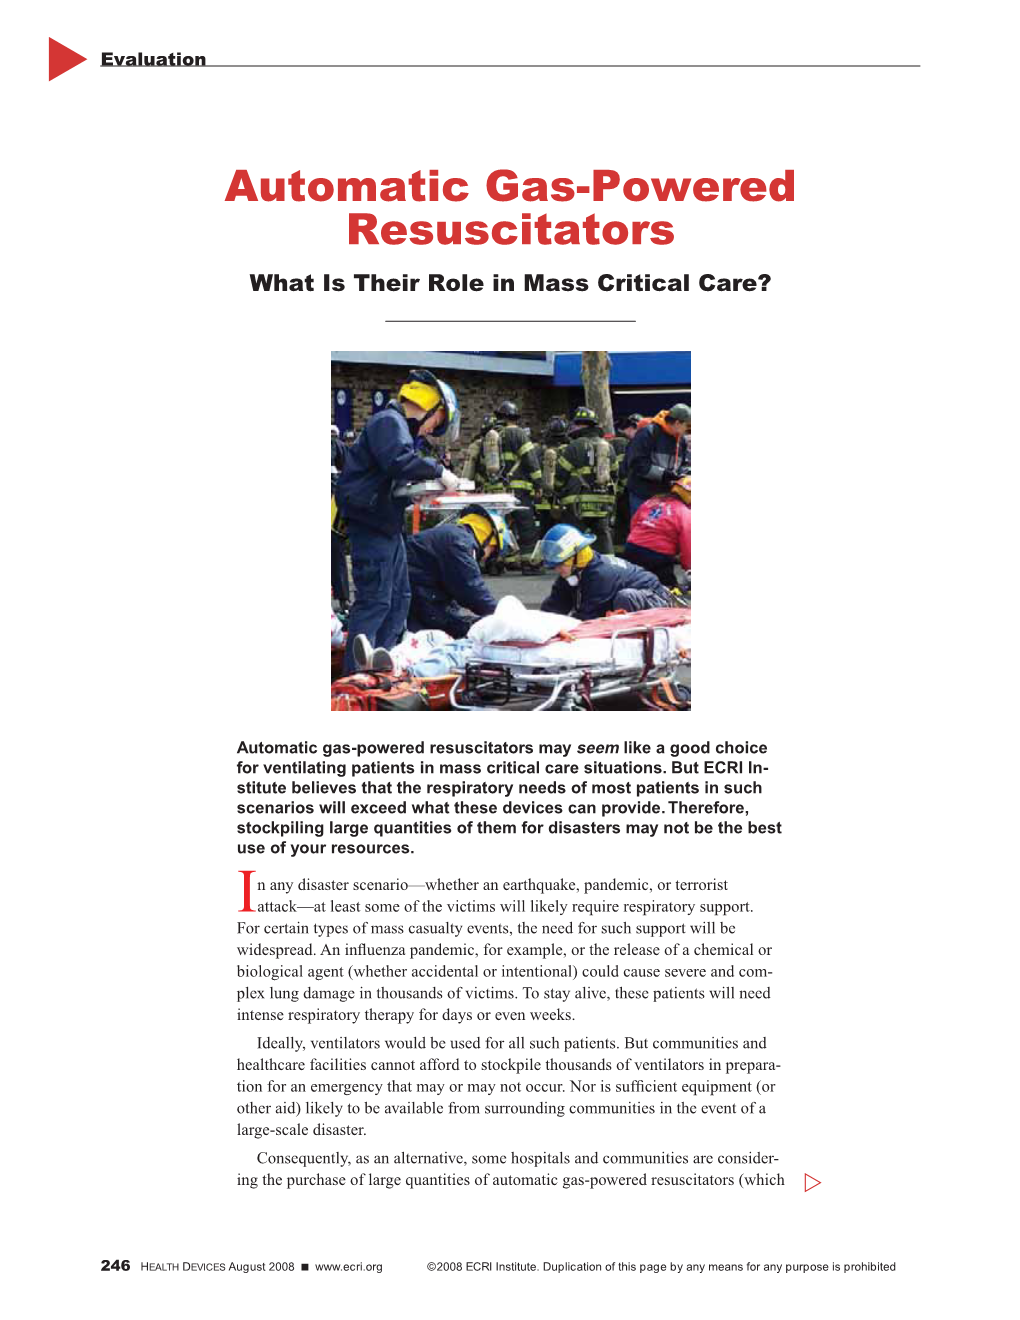 Automatic Gas-Powered Resuscitators What Is Their Role in Mass Critical Care?